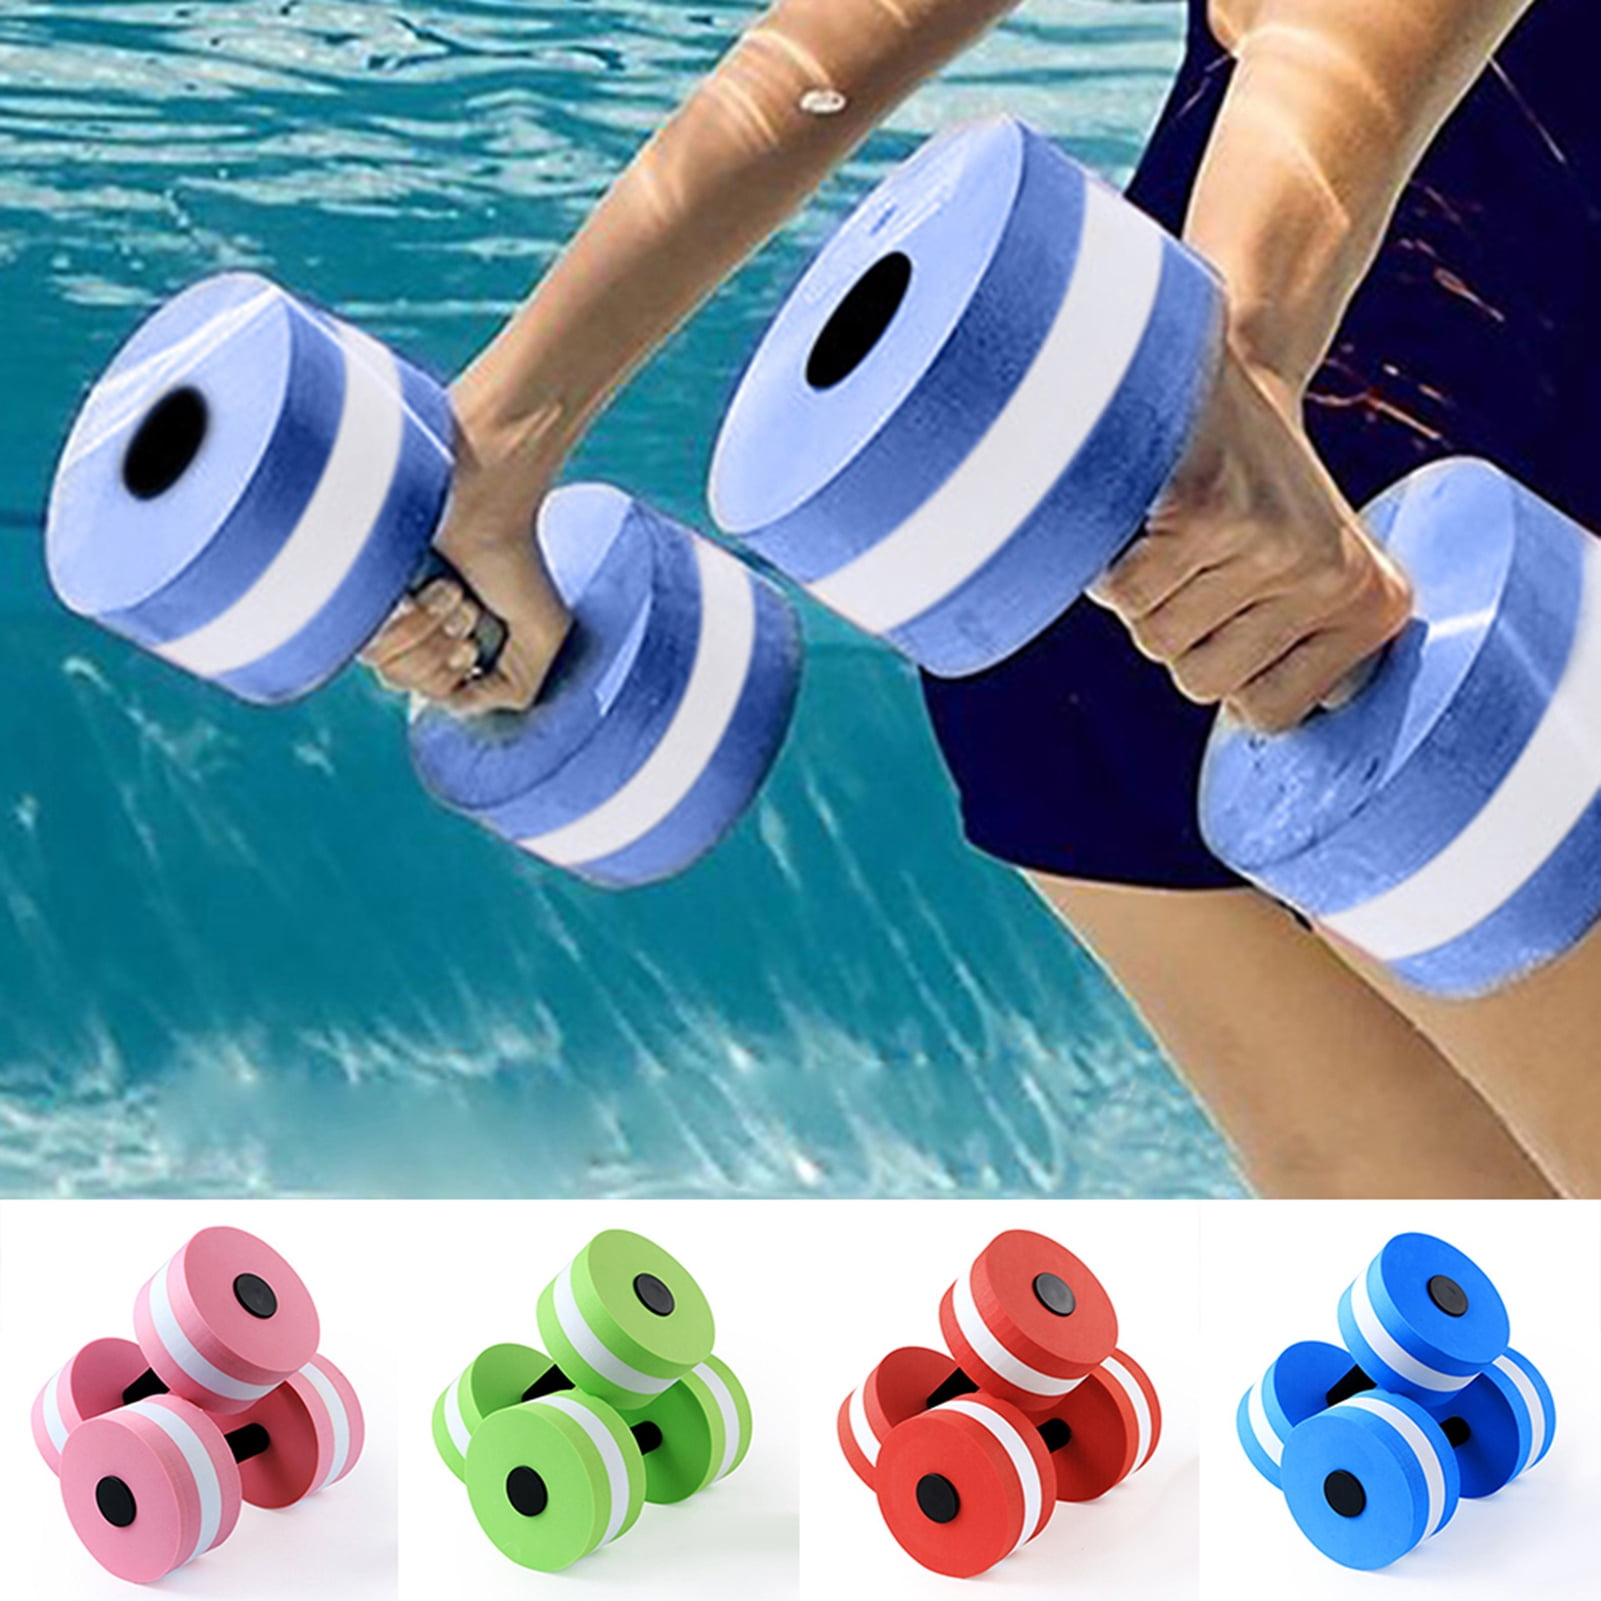 2 Pcs EVA Weight Water Triangle Dumbbell Aquatic Hand Swimming Barbell Accessory 